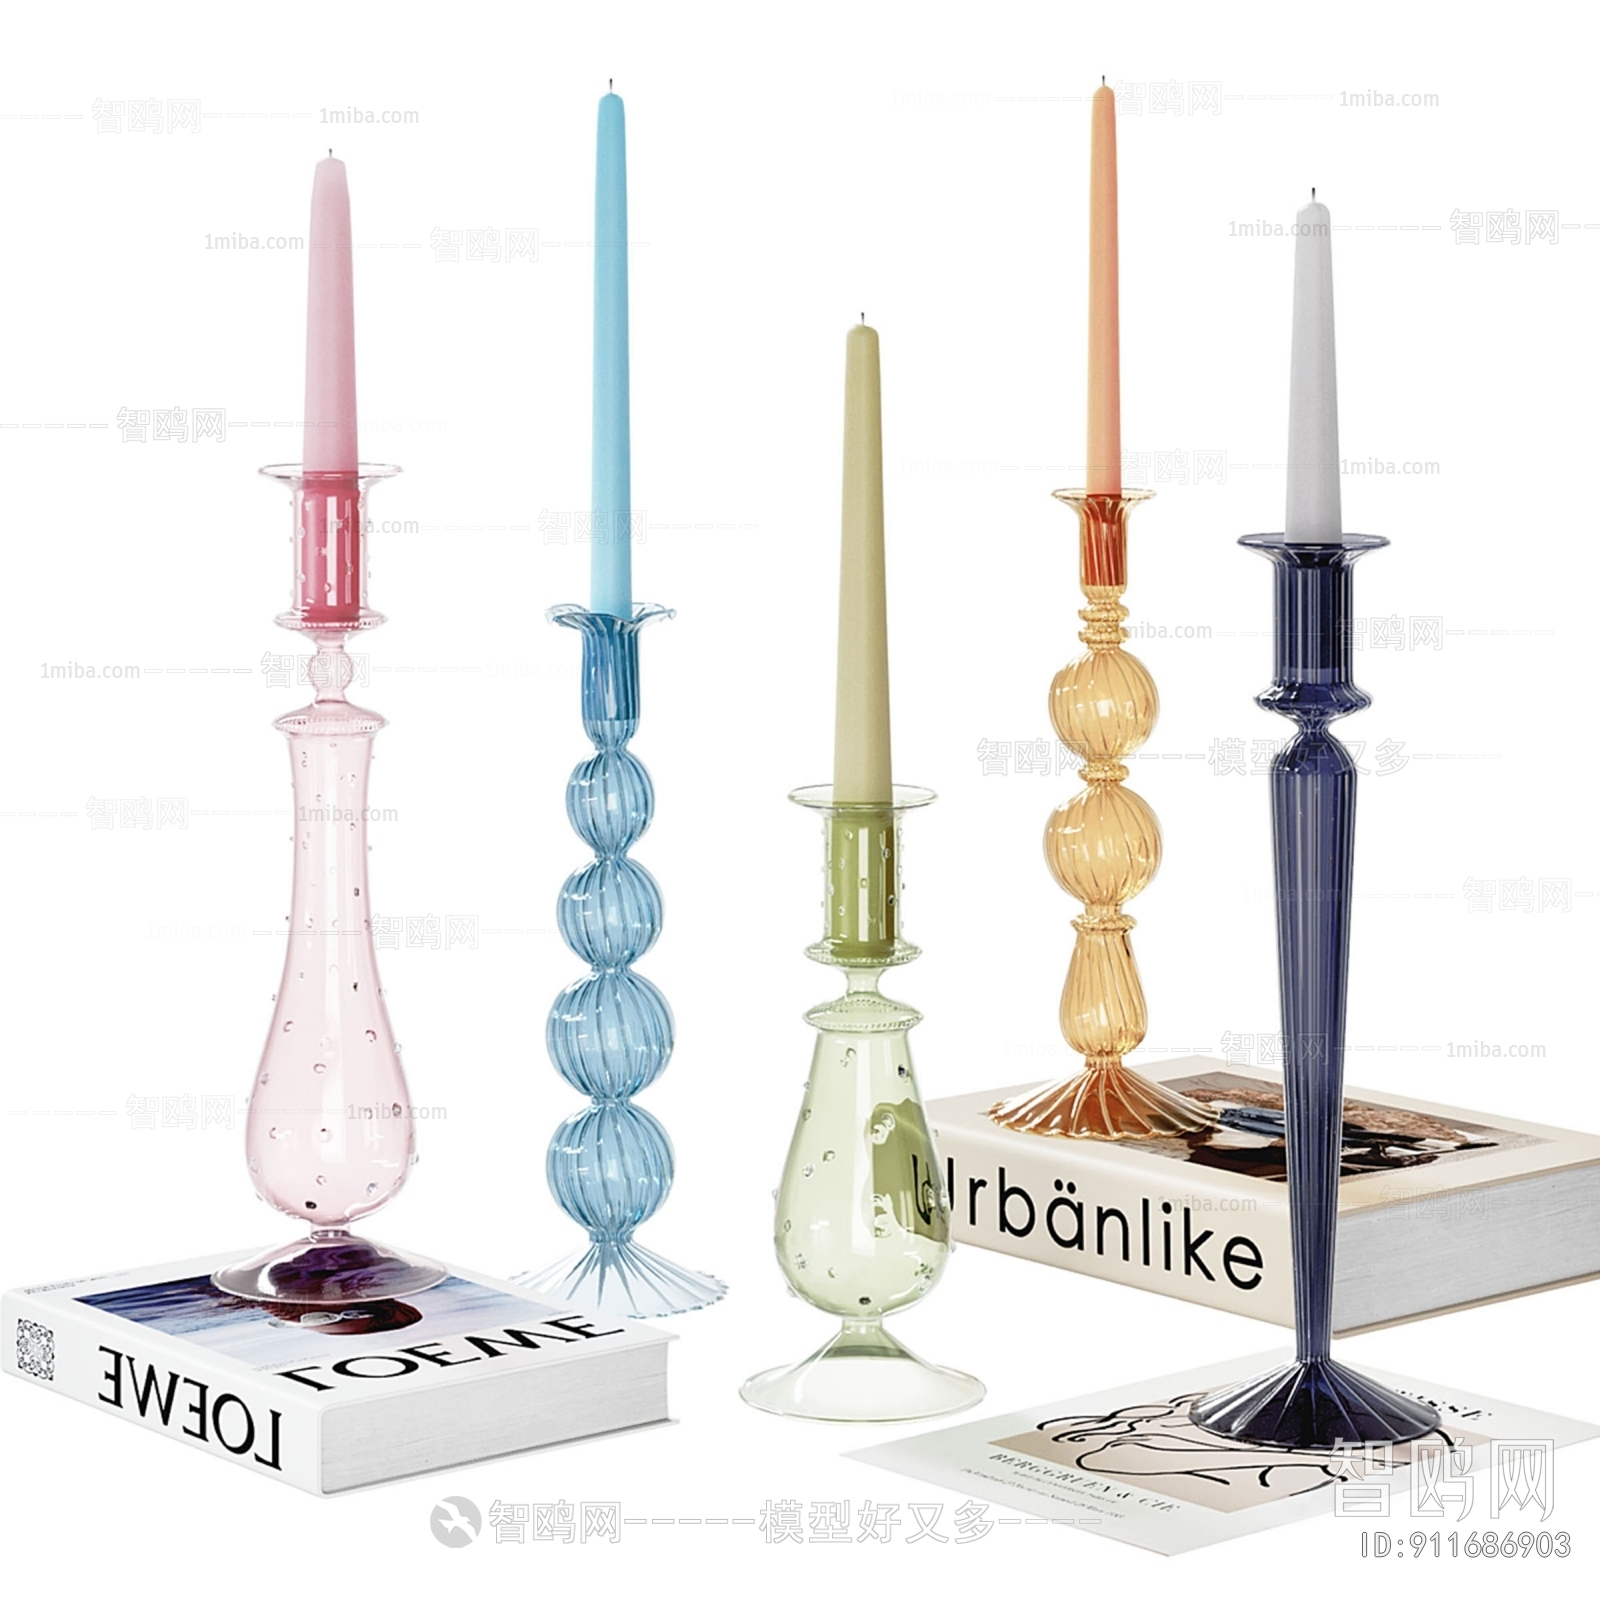 American Style Candles/Candlesticks